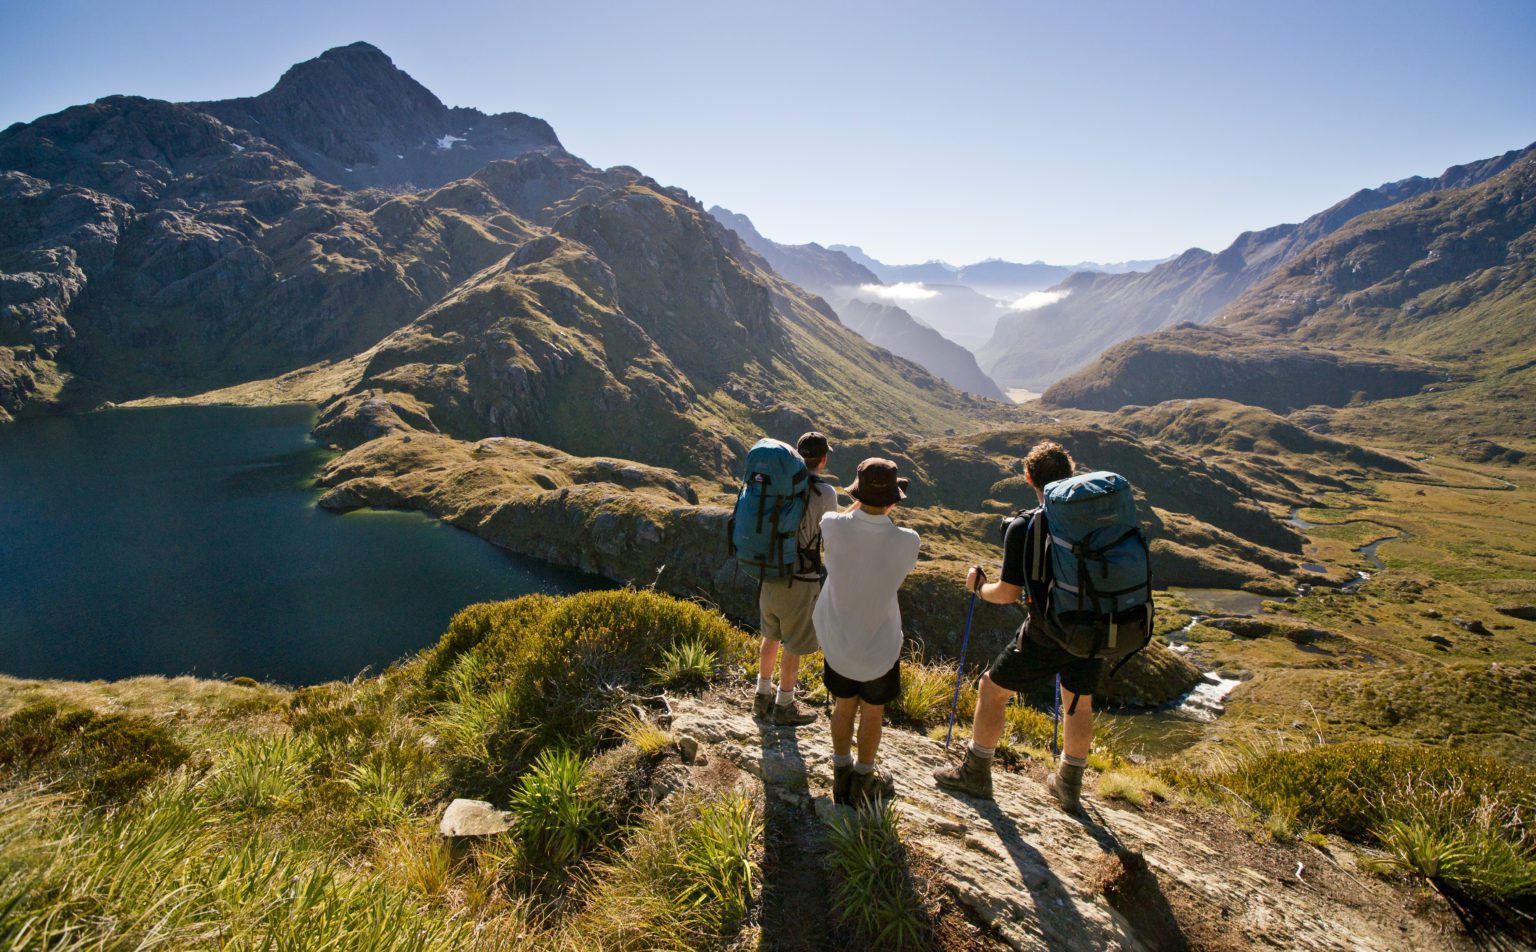 Hikers stop to enjoy the mountain views on the Routeburn Track.